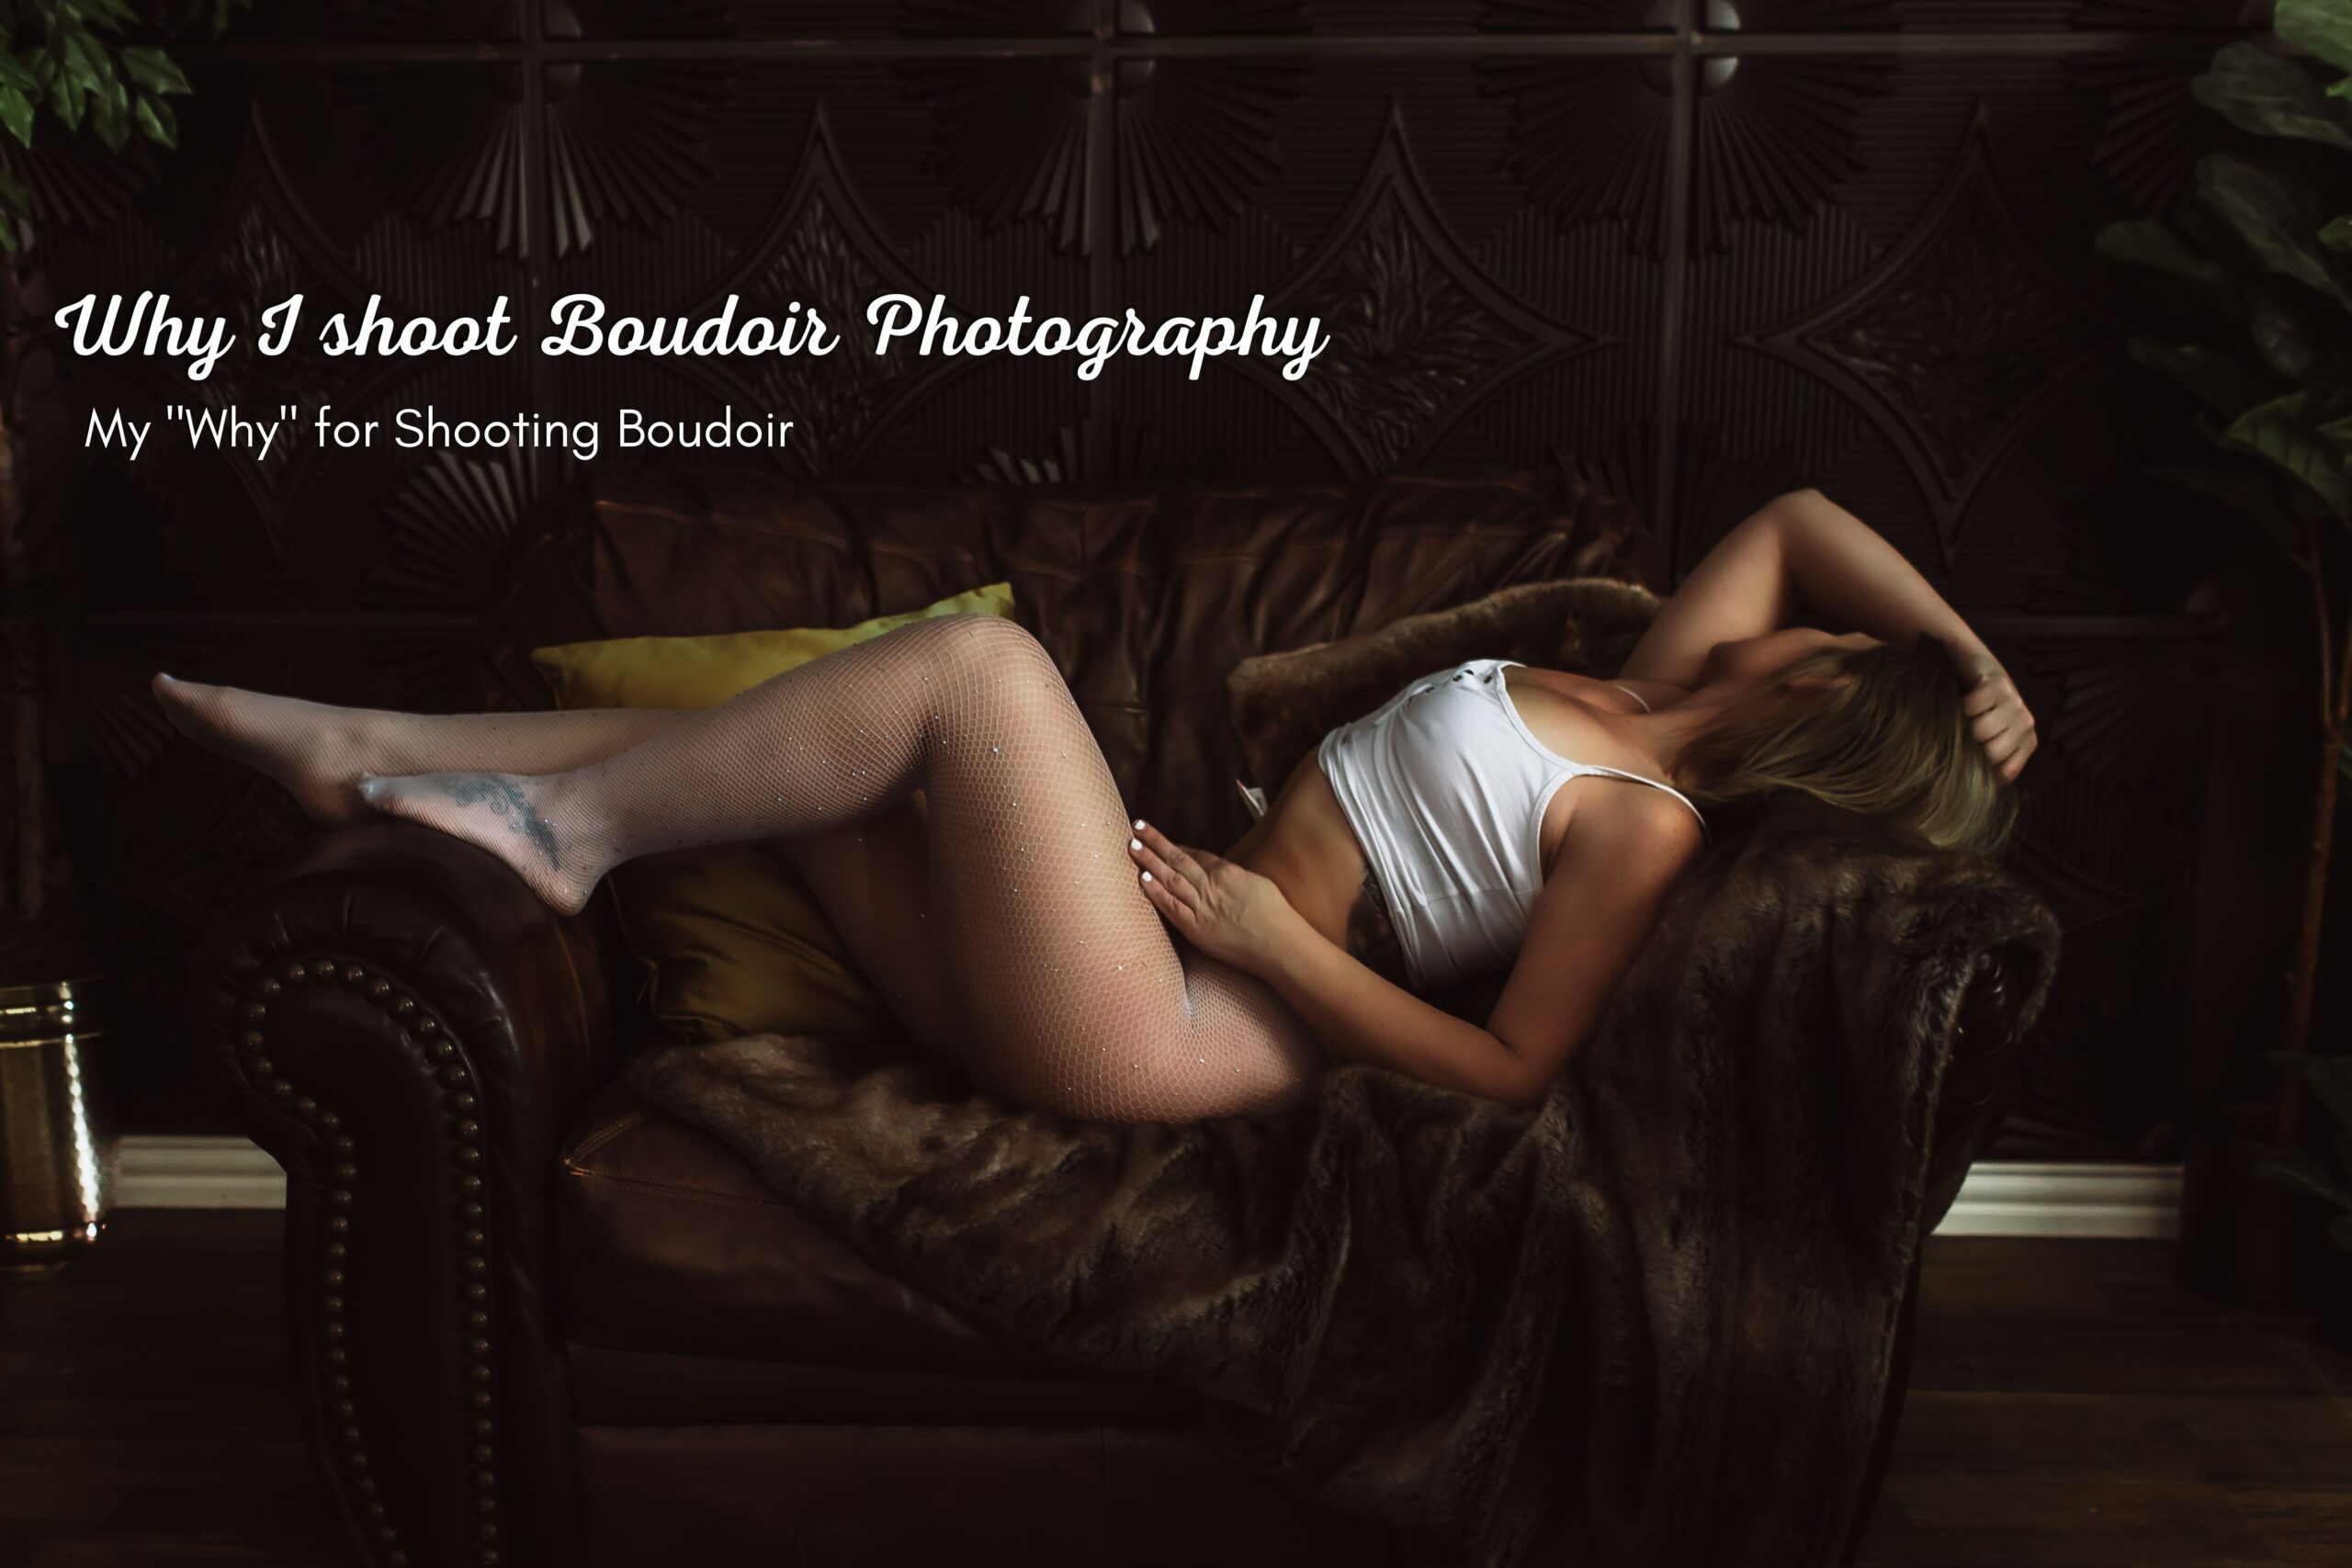 boudoir pose on a brown leather chair